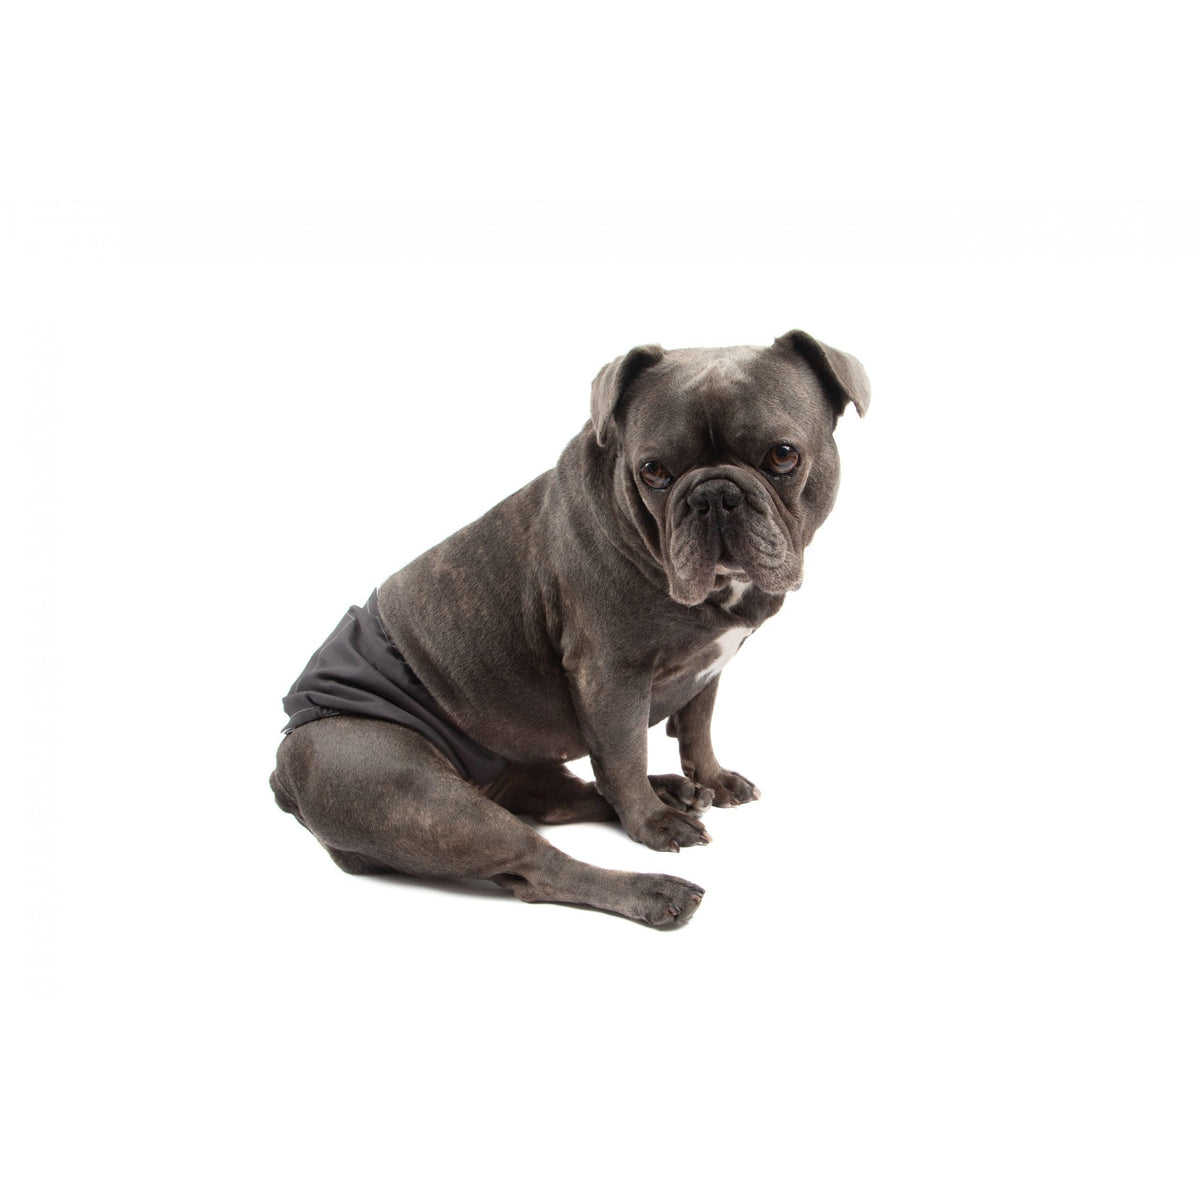 Dundies Black Belly Band-Dundies Australia - Vet Recommended Pet Nappies